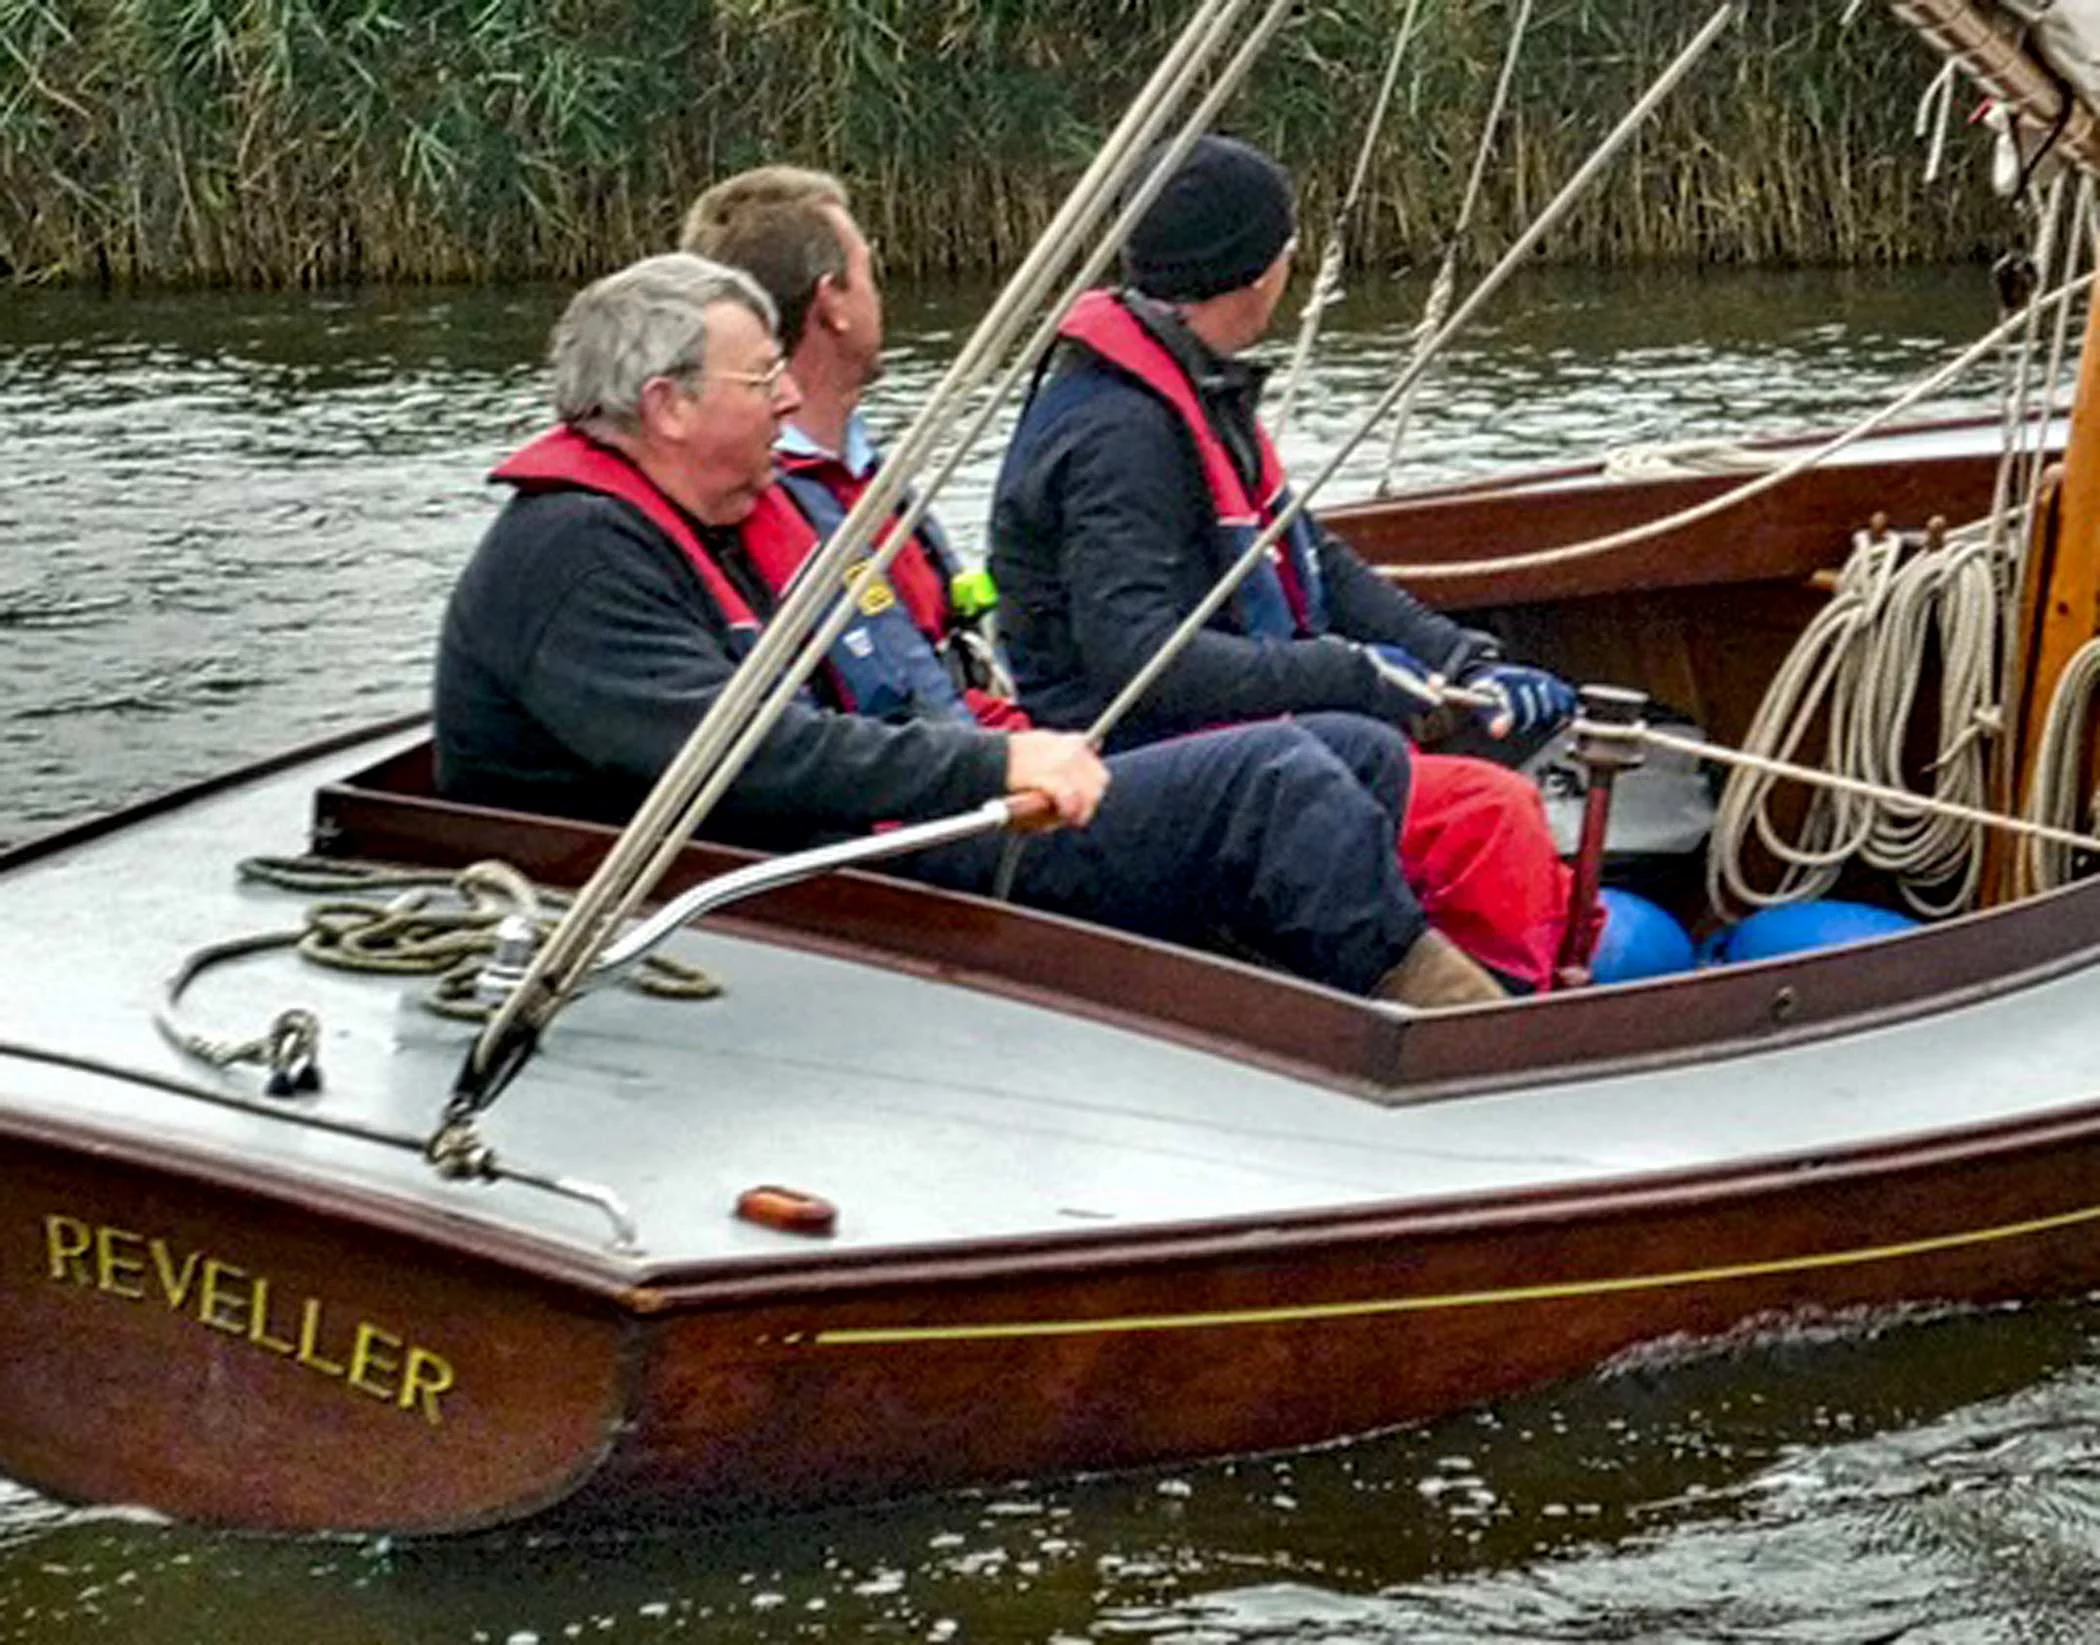 A group learning to sail on a traditional wooden half-decker on the Norfolk Broads.